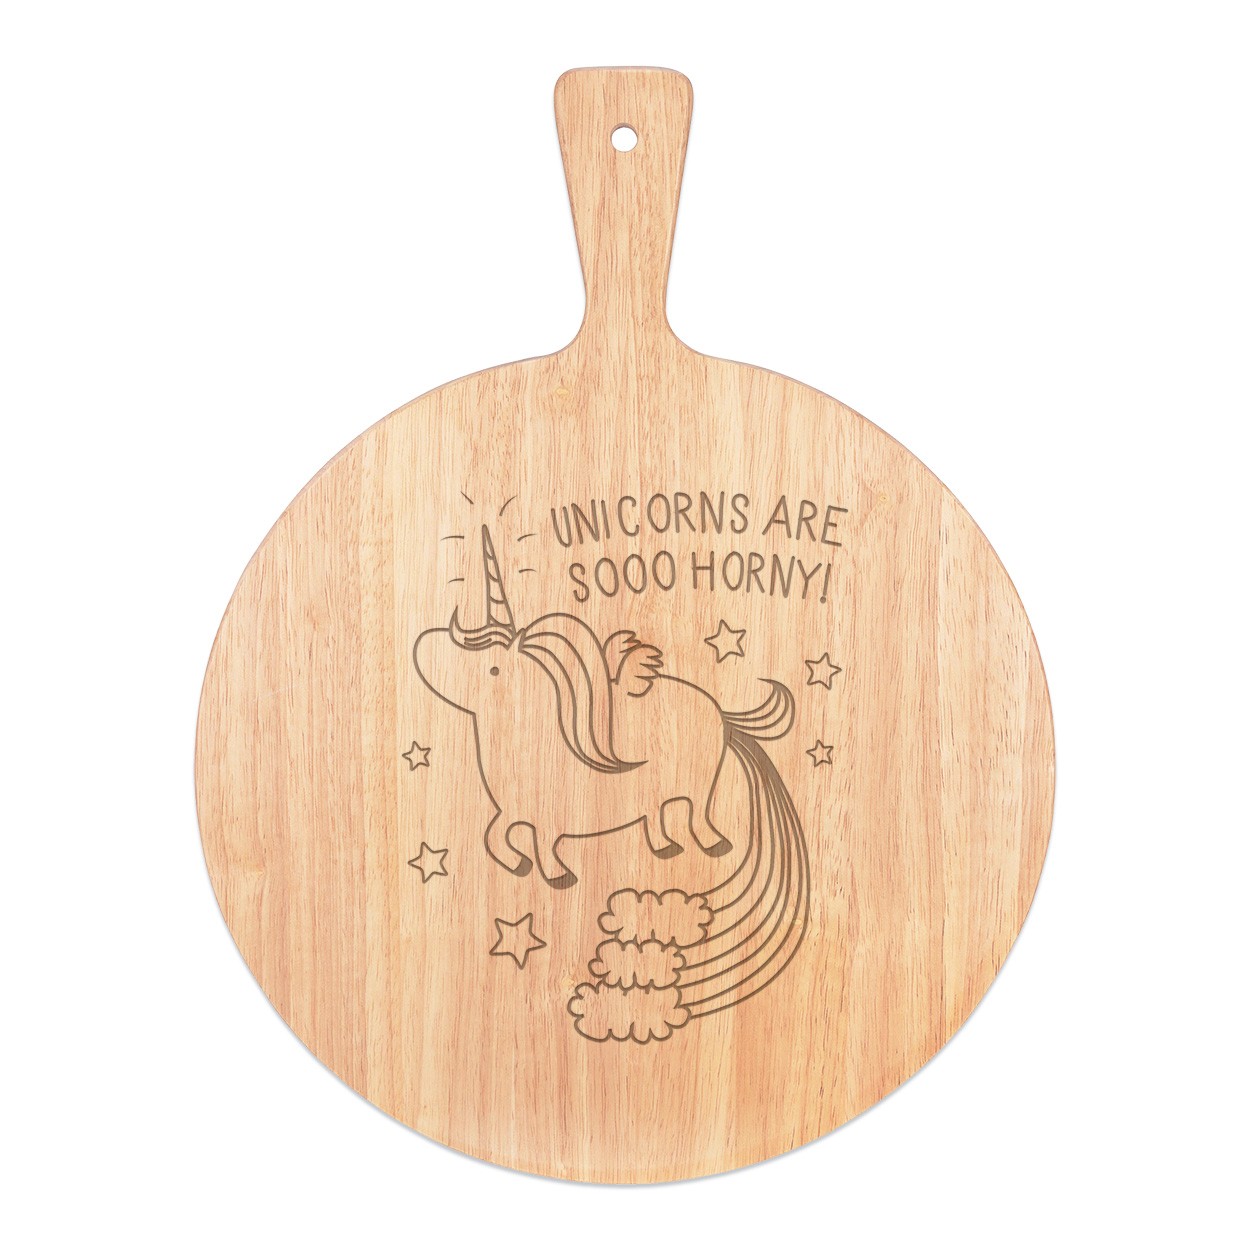 Unicorns Are Sooo Horny Pizza Board Paddle Serving Tray Handle Round Wooden 45x34cm